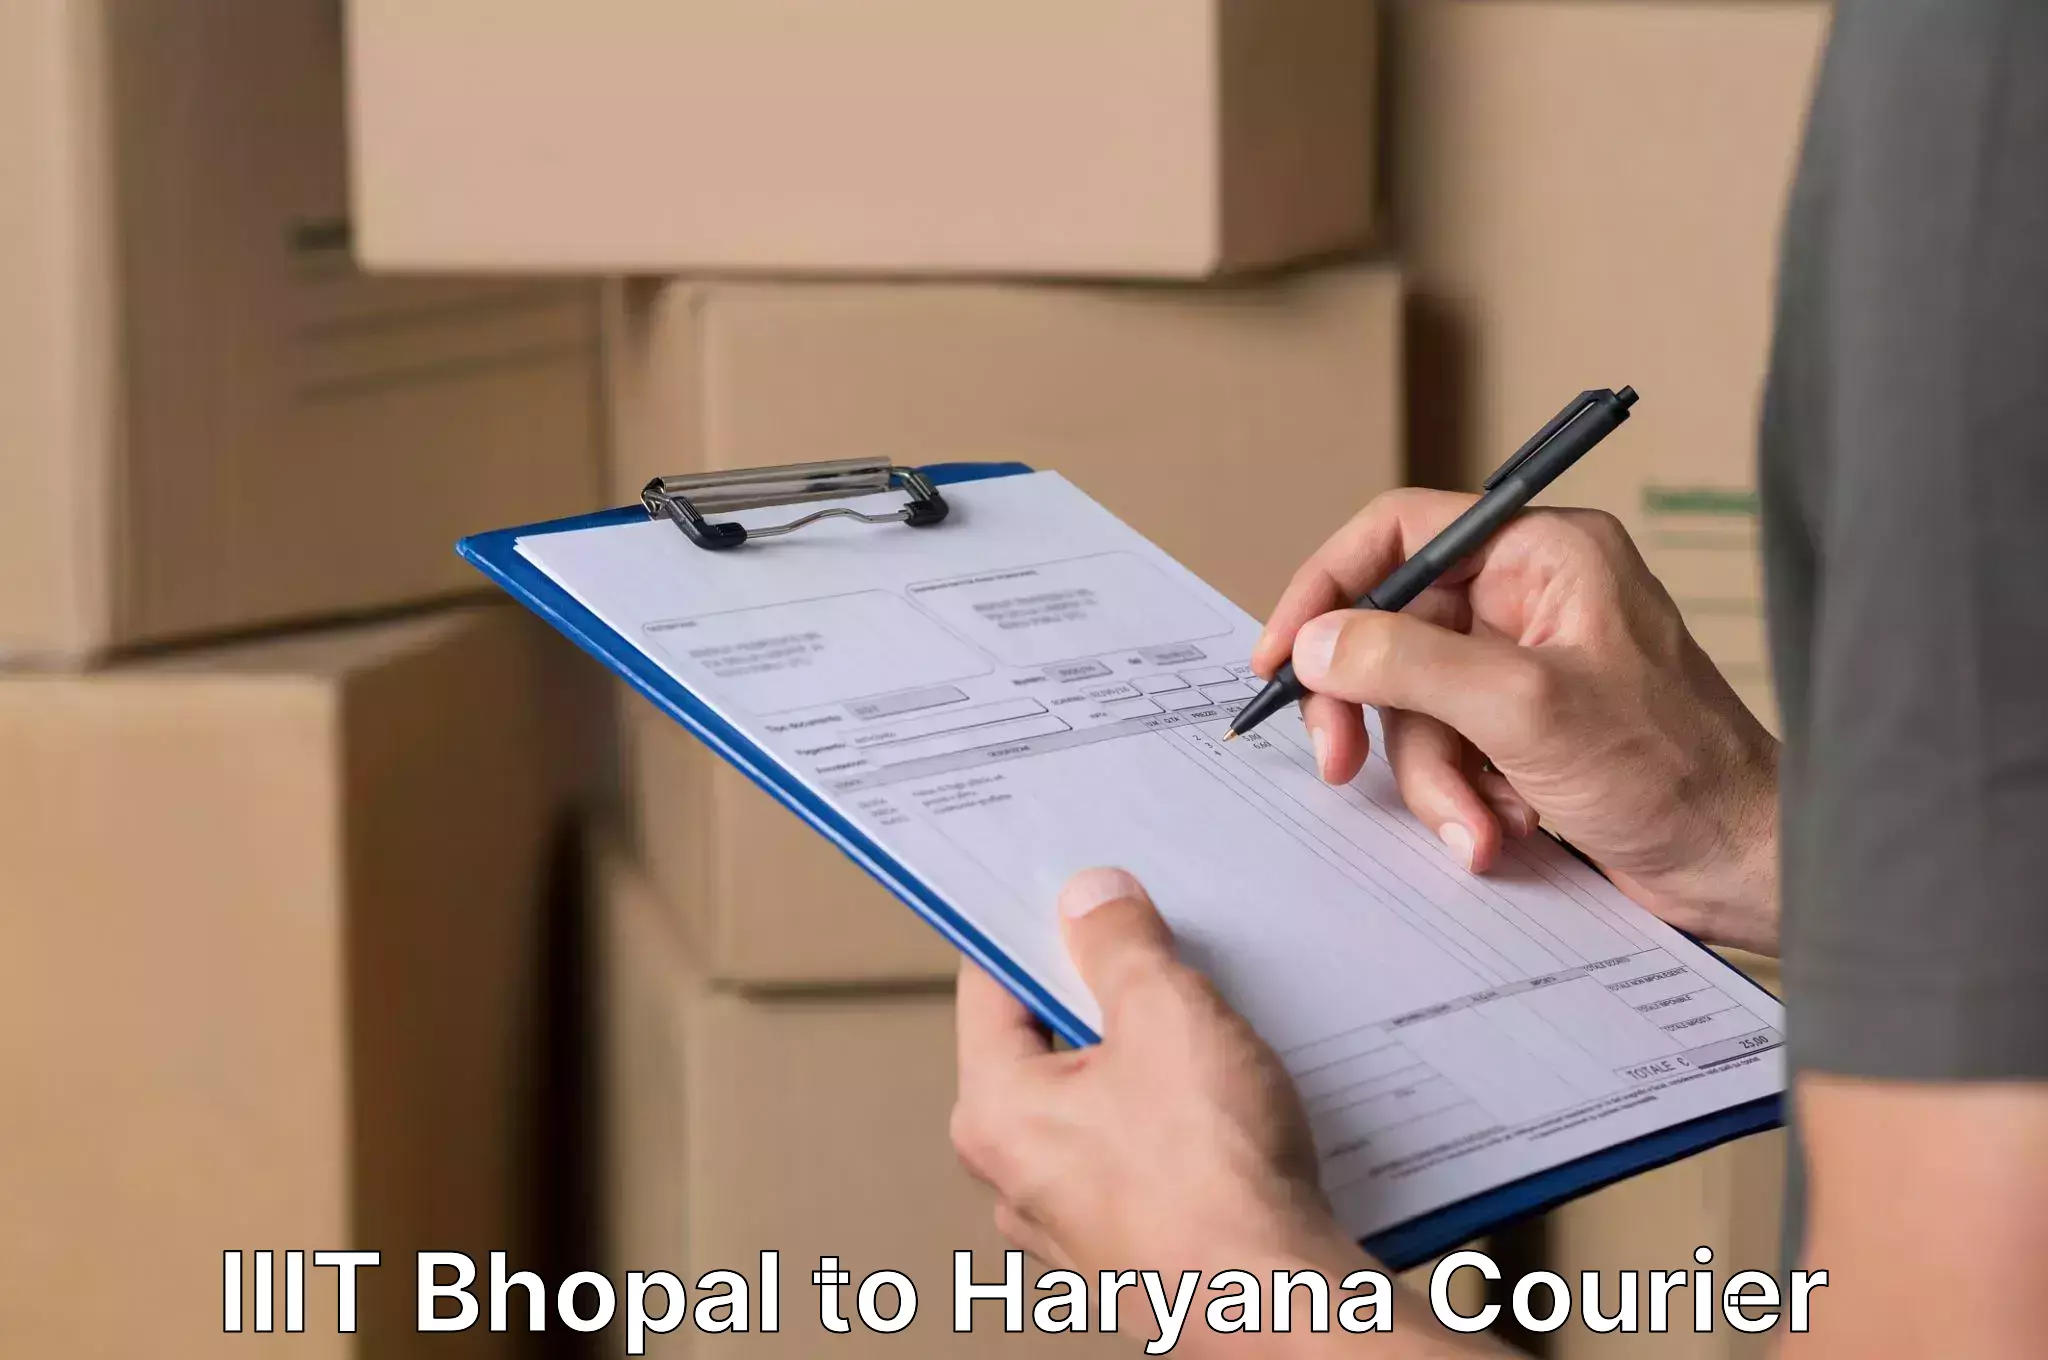 Quality relocation assistance IIIT Bhopal to Rewari